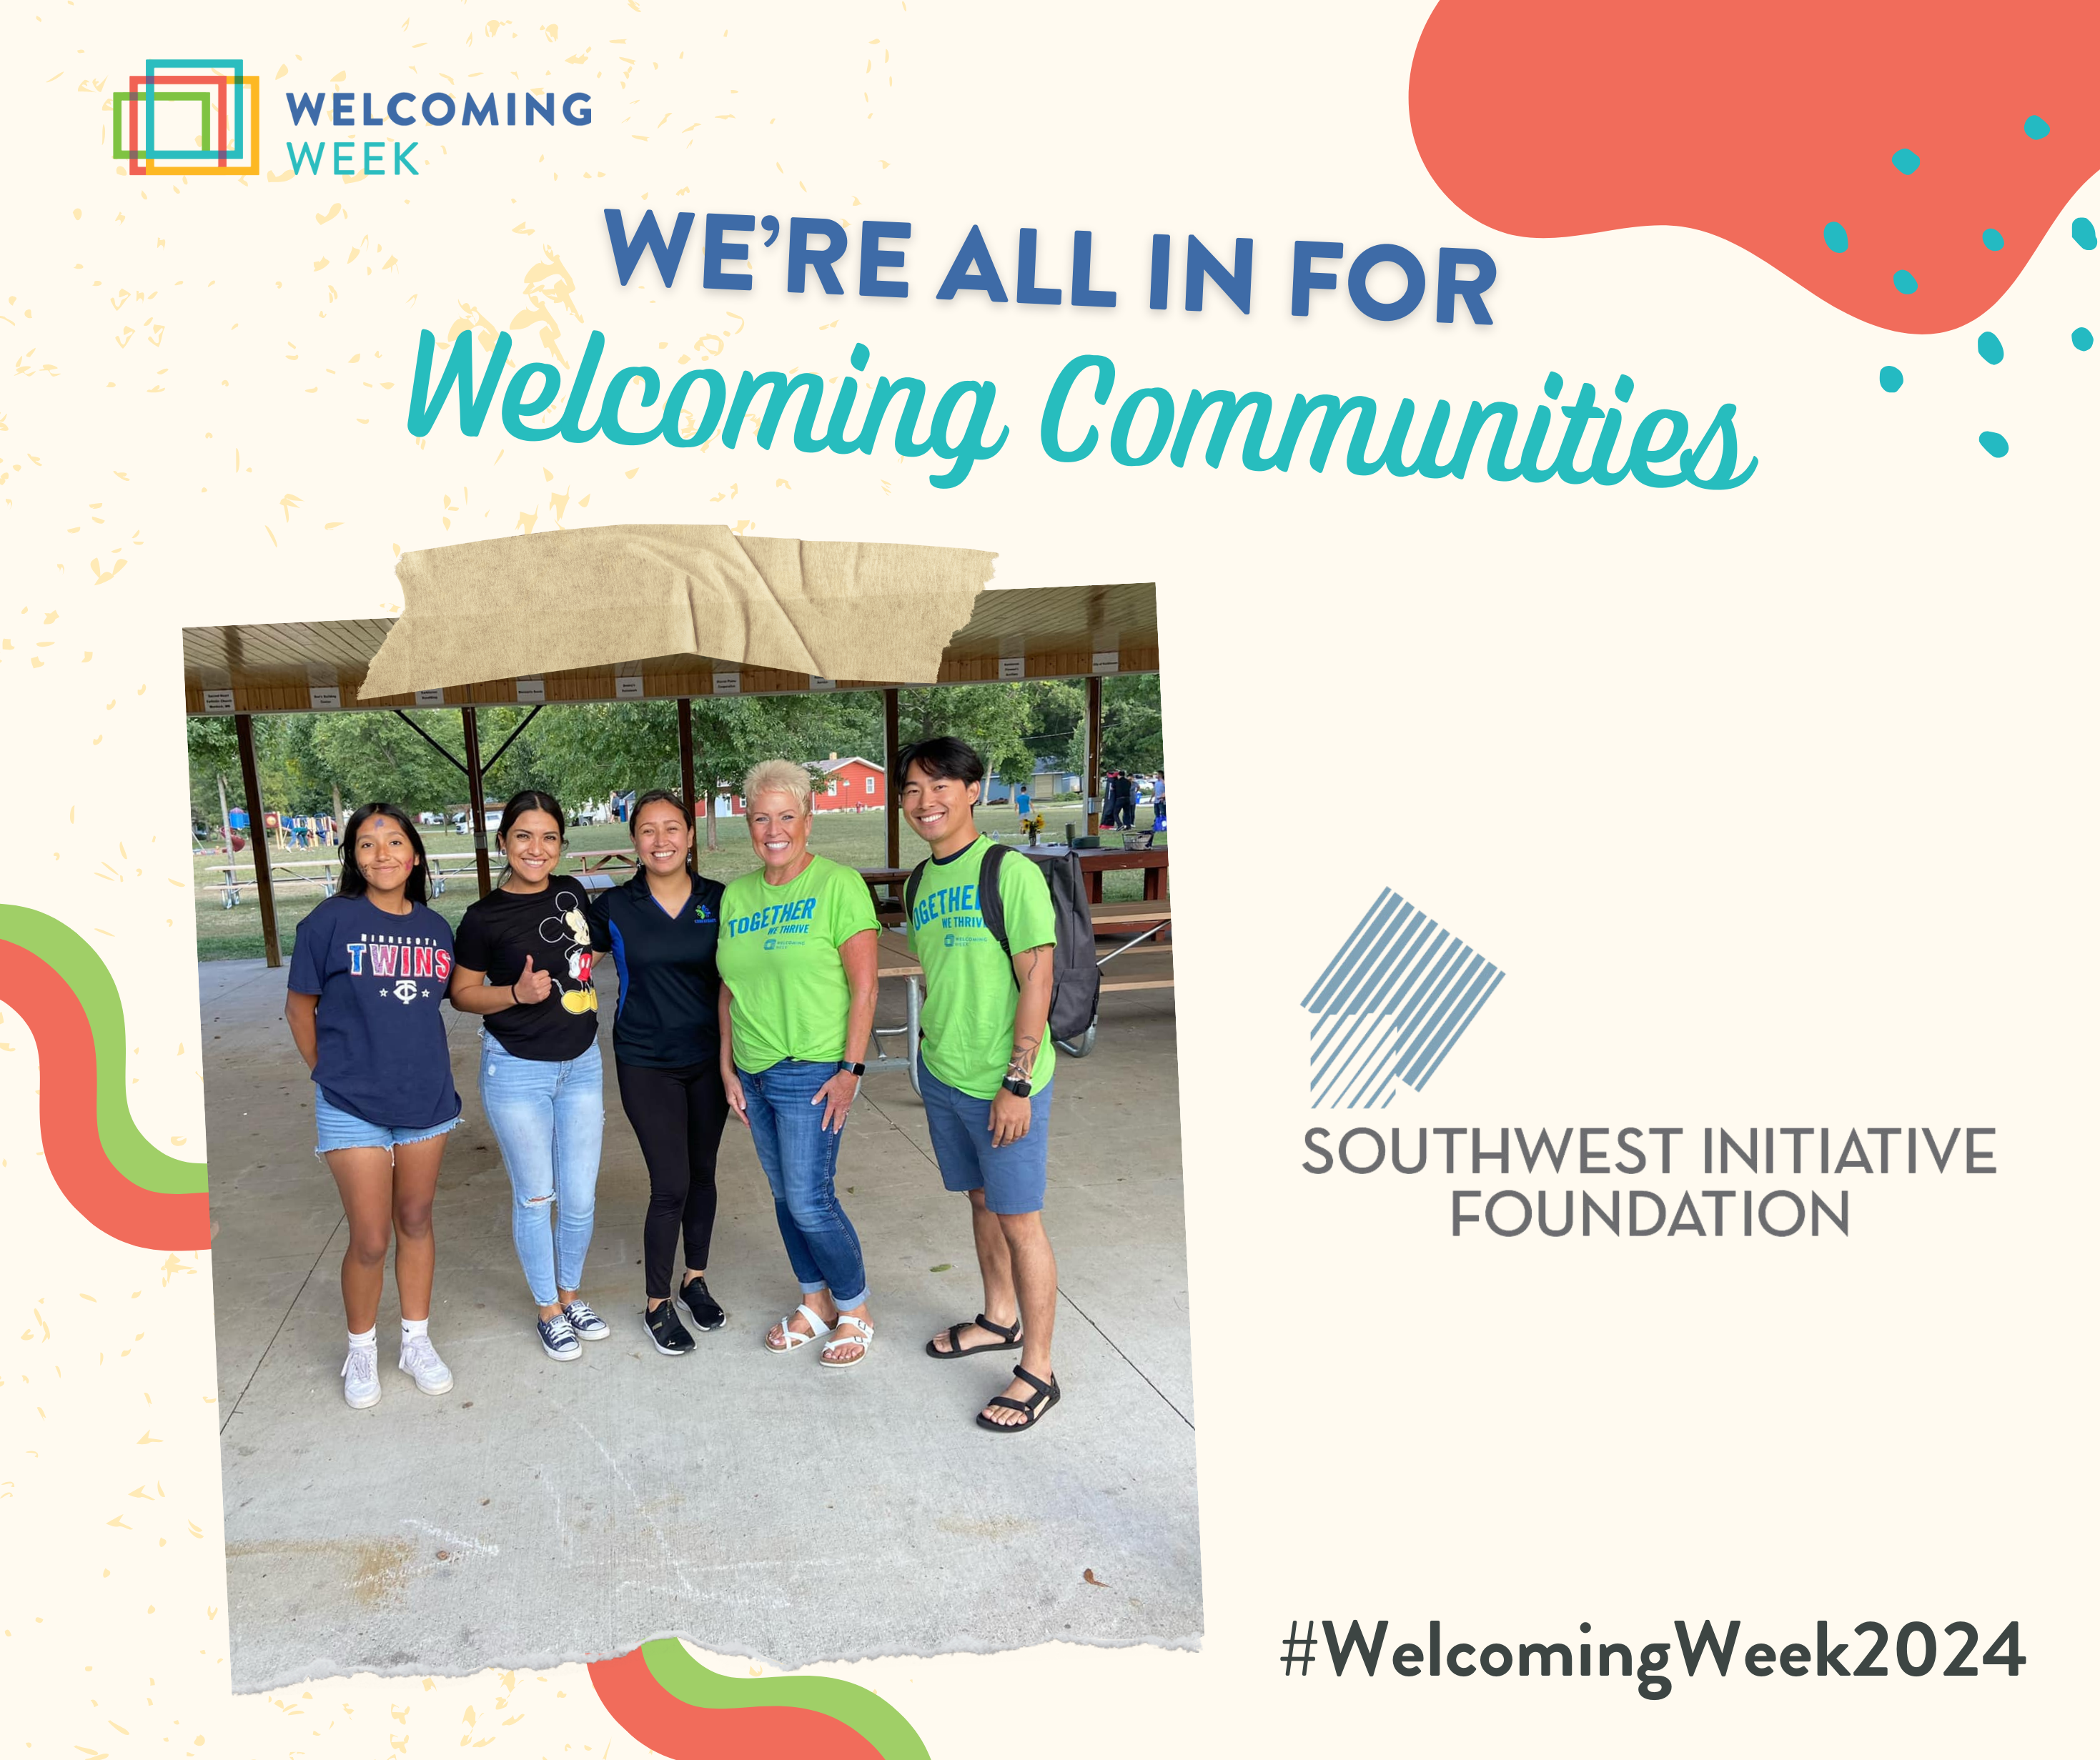 A graphic with a photo from Swift County Area Welcoming Week, We're all in for Welcoming Communities and the Southwest Initiative Foundation logo